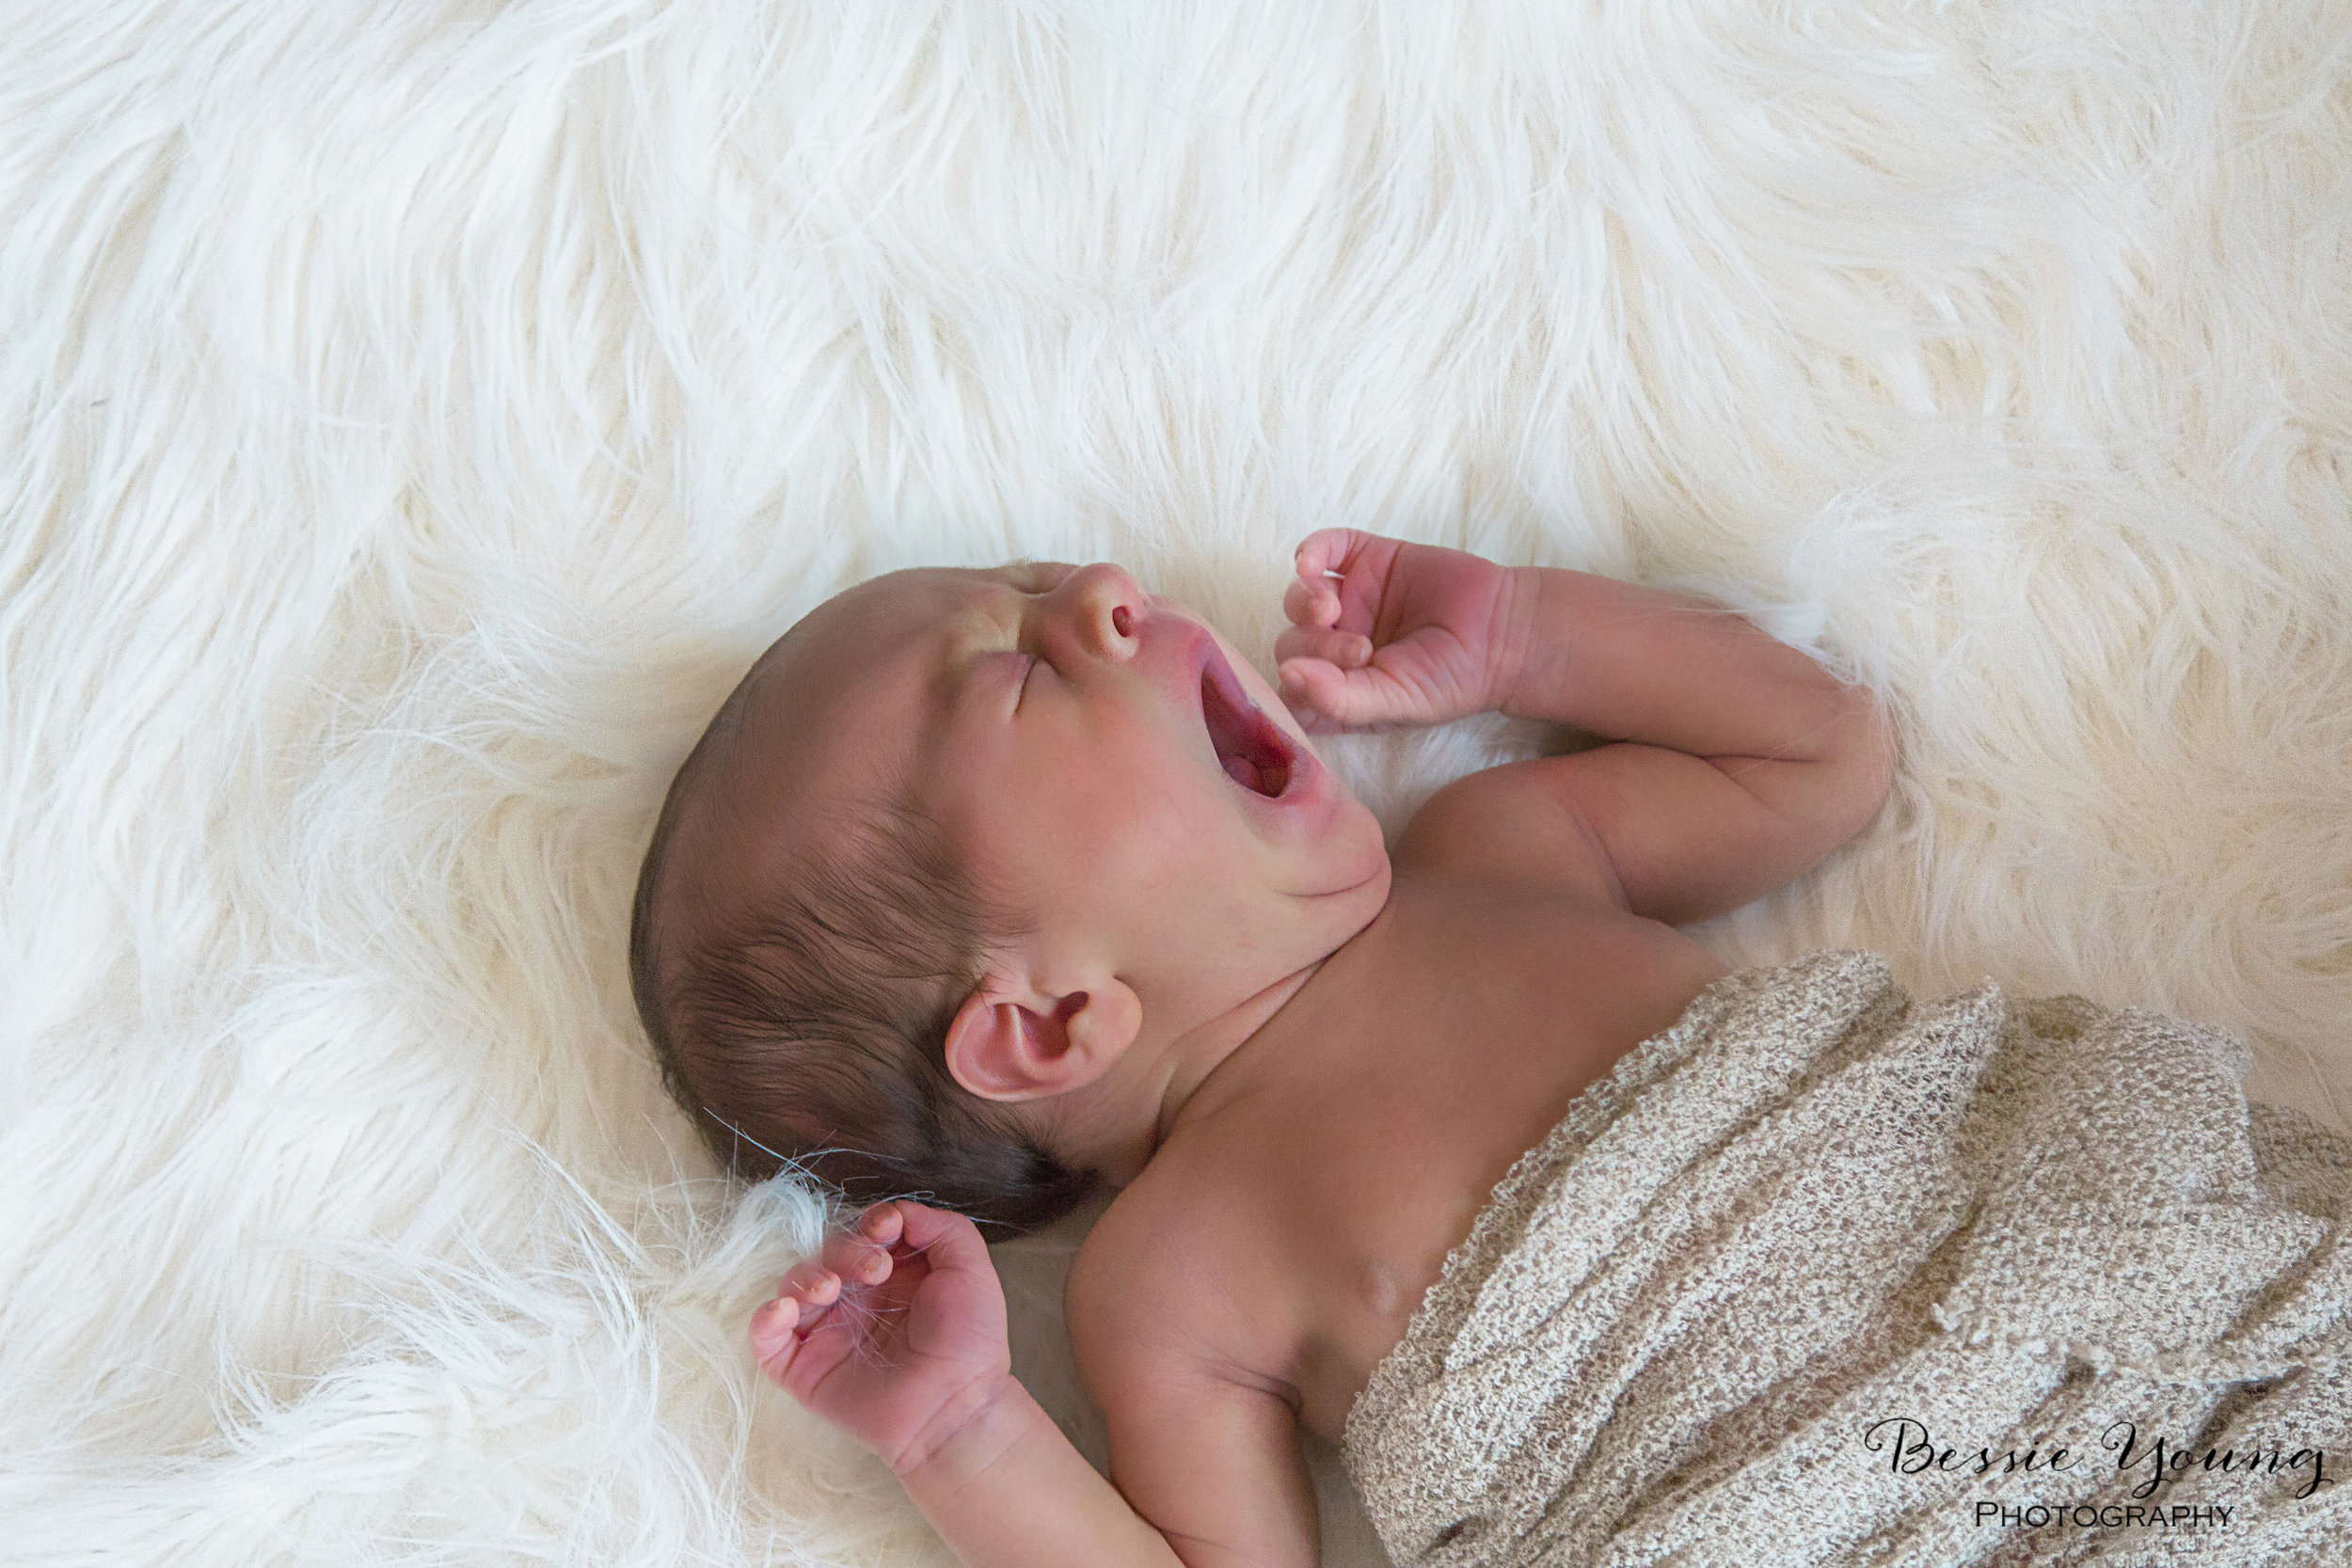 Kale's Newborn Session 1.29.16 - Bessie Young Photography-84 ed.jpg